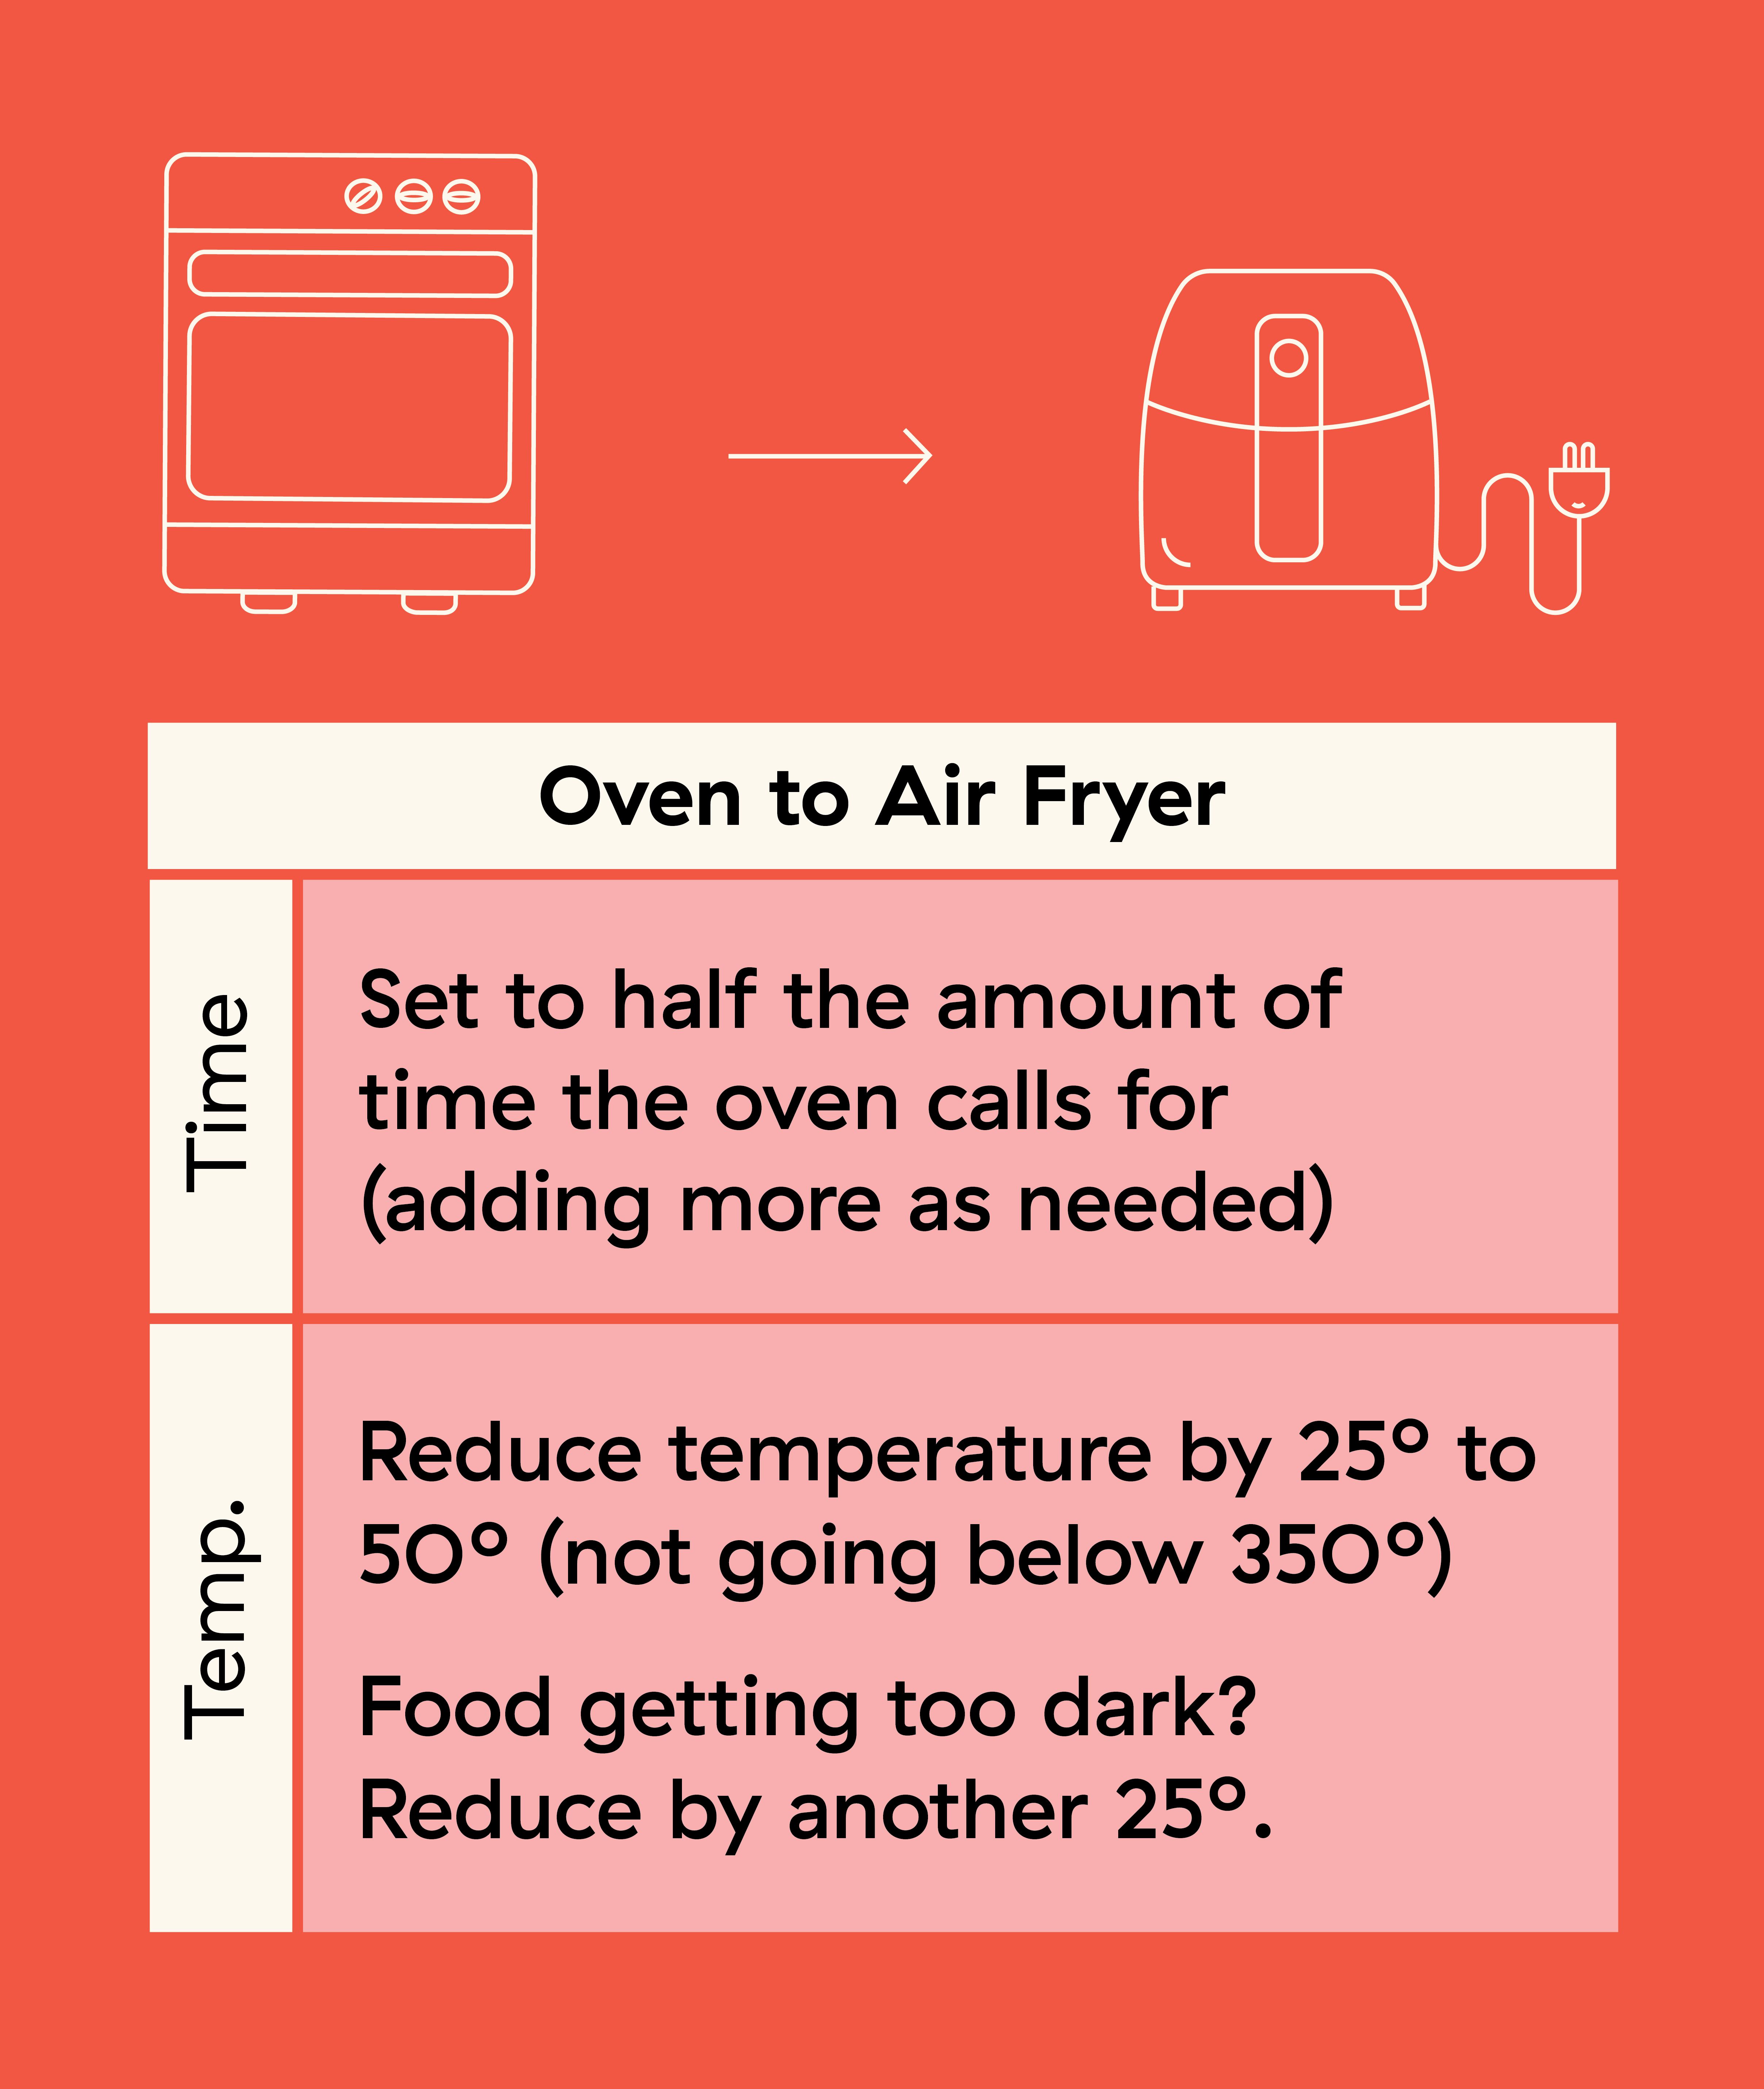 How to check the temperature in Air Fryers